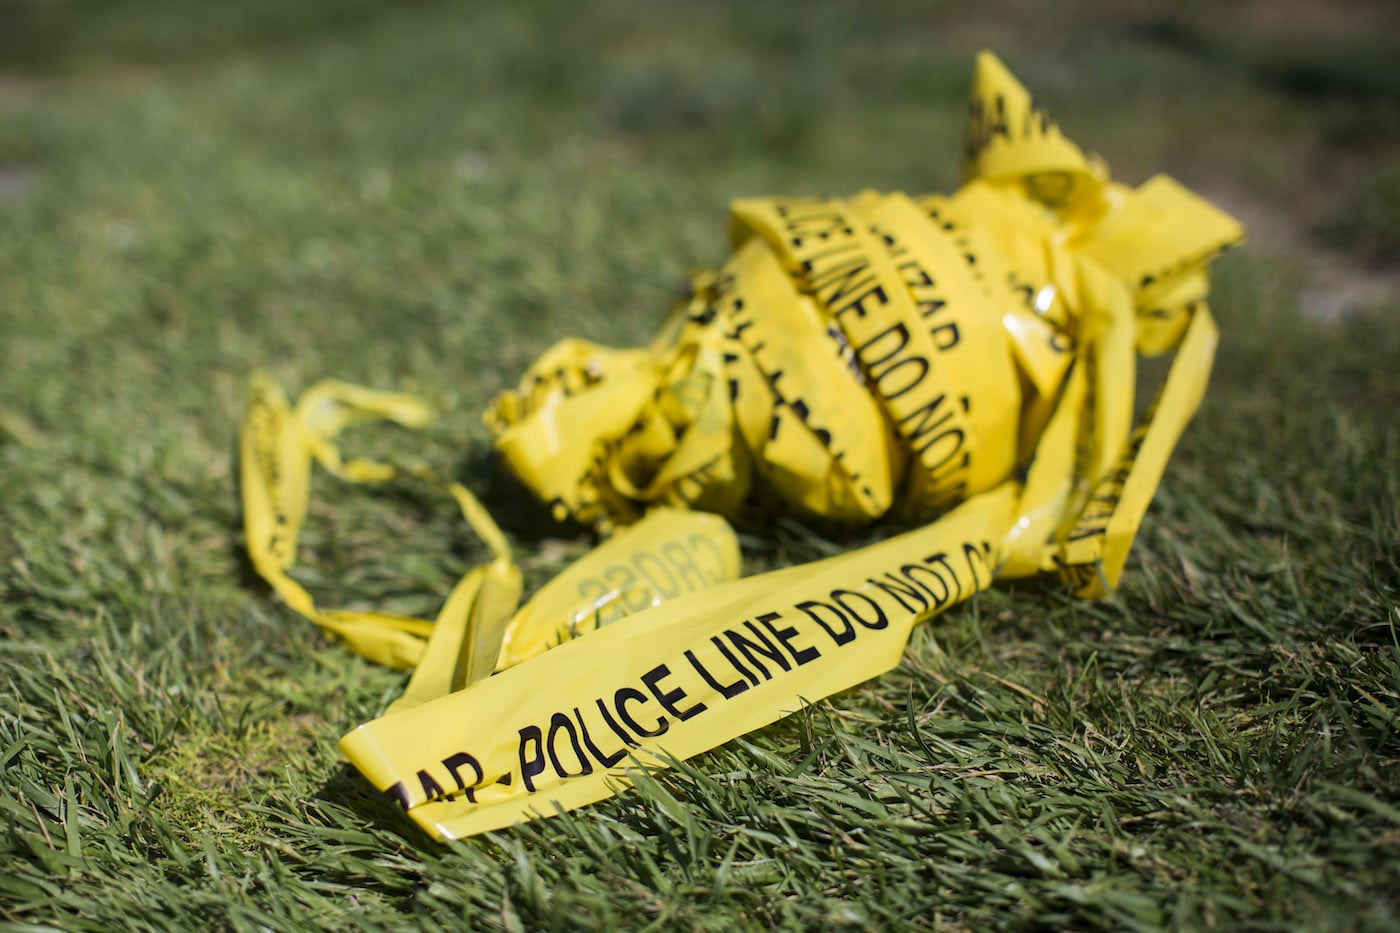 Police crime scene tape in a bundle on the grass